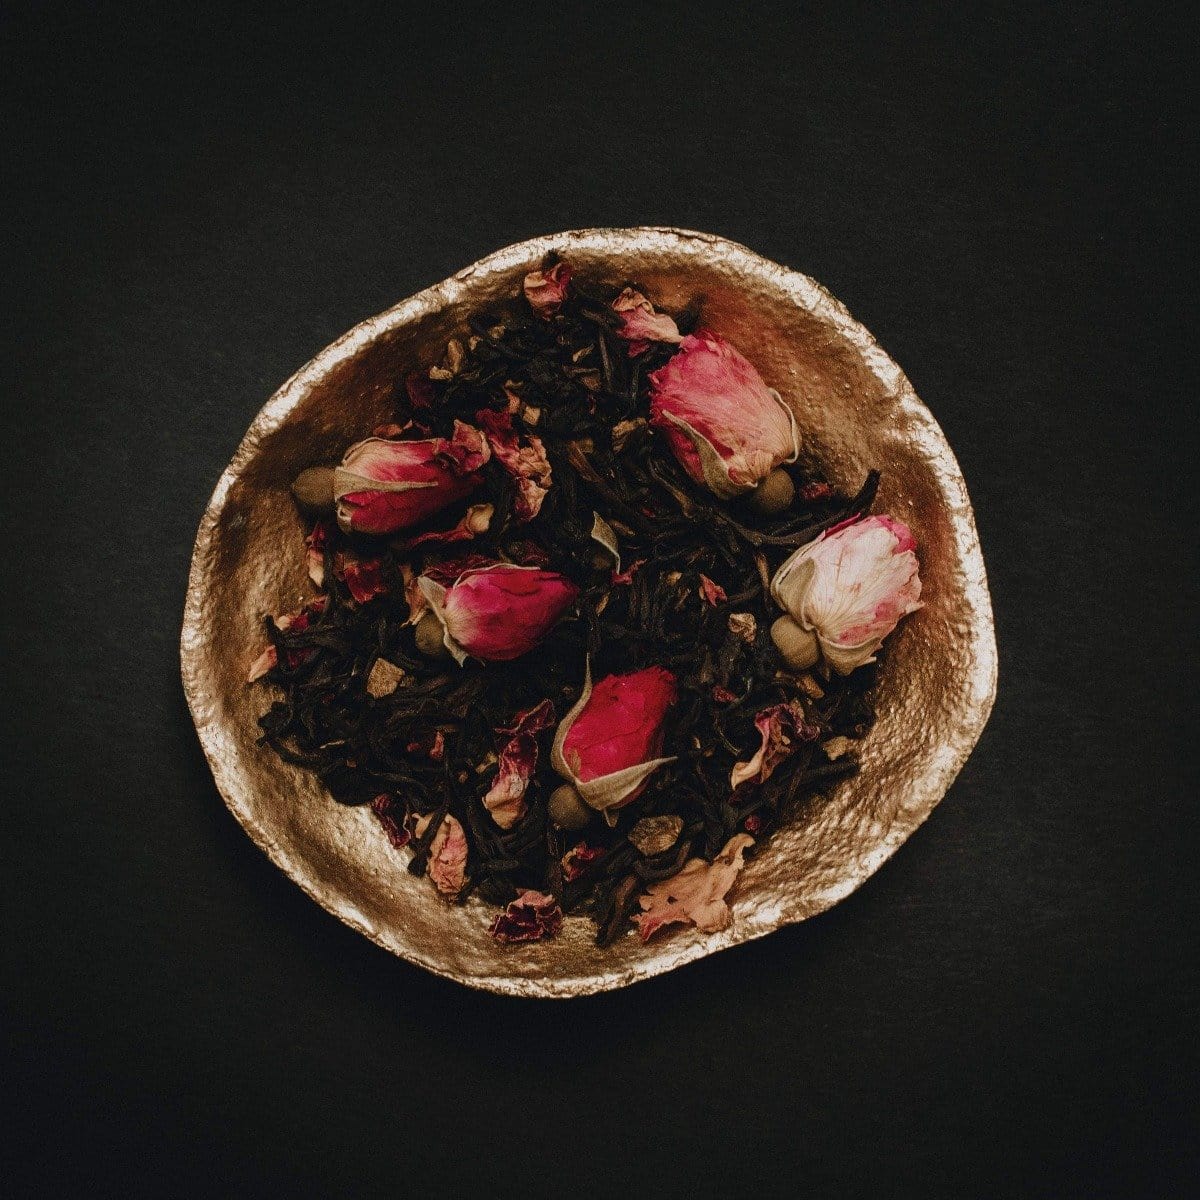 A golden bowl filled with a blend of Soulmate: Chocolate-Raspberry-Rose Black Tea for Finding &amp; Celebrating Love by Magic Hour, set against a dark background. The delicate pink and white rose buds add a touch of color to the deep brown tones of the organic tea leaves, creating an enchanting scene worthy of a magic hour.